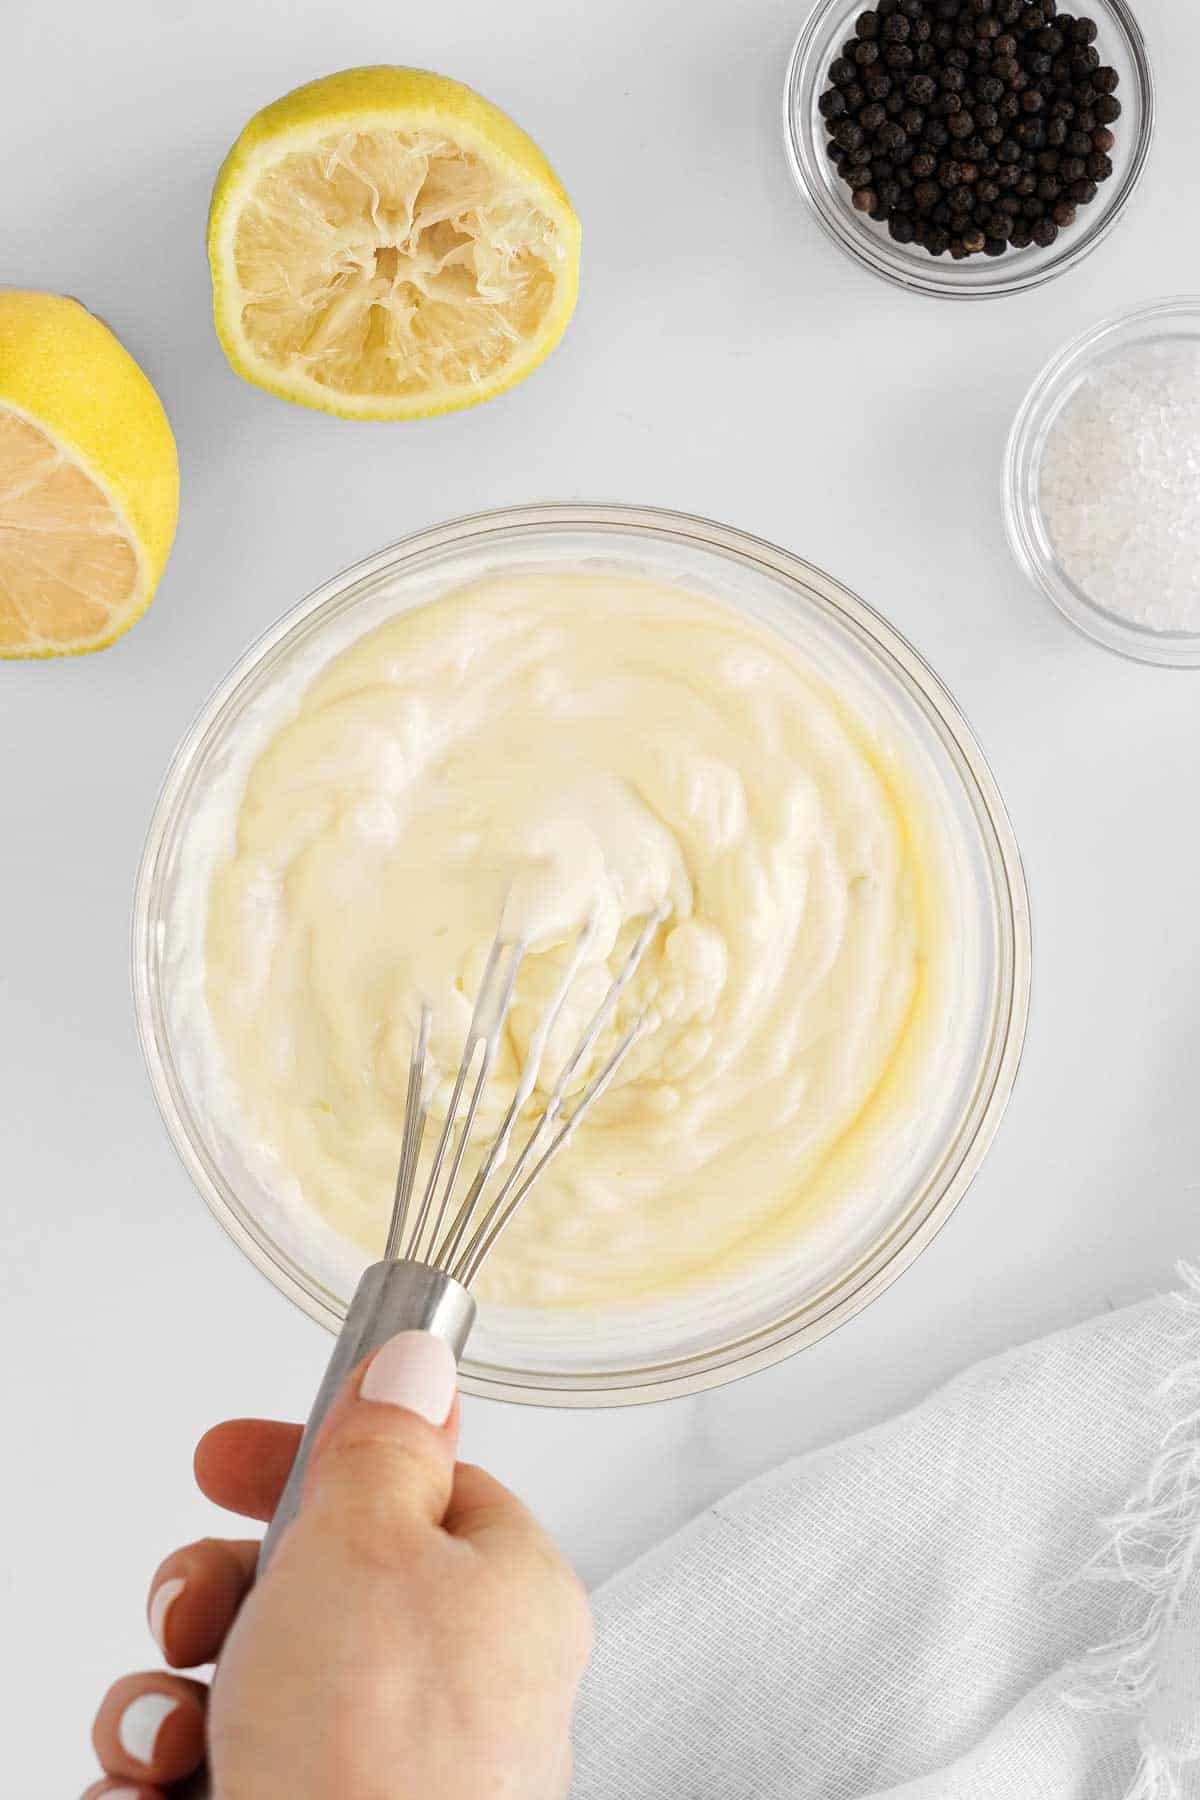 Whisking chicken salad dressing in a bowl with lemon and condiments on a white surface.